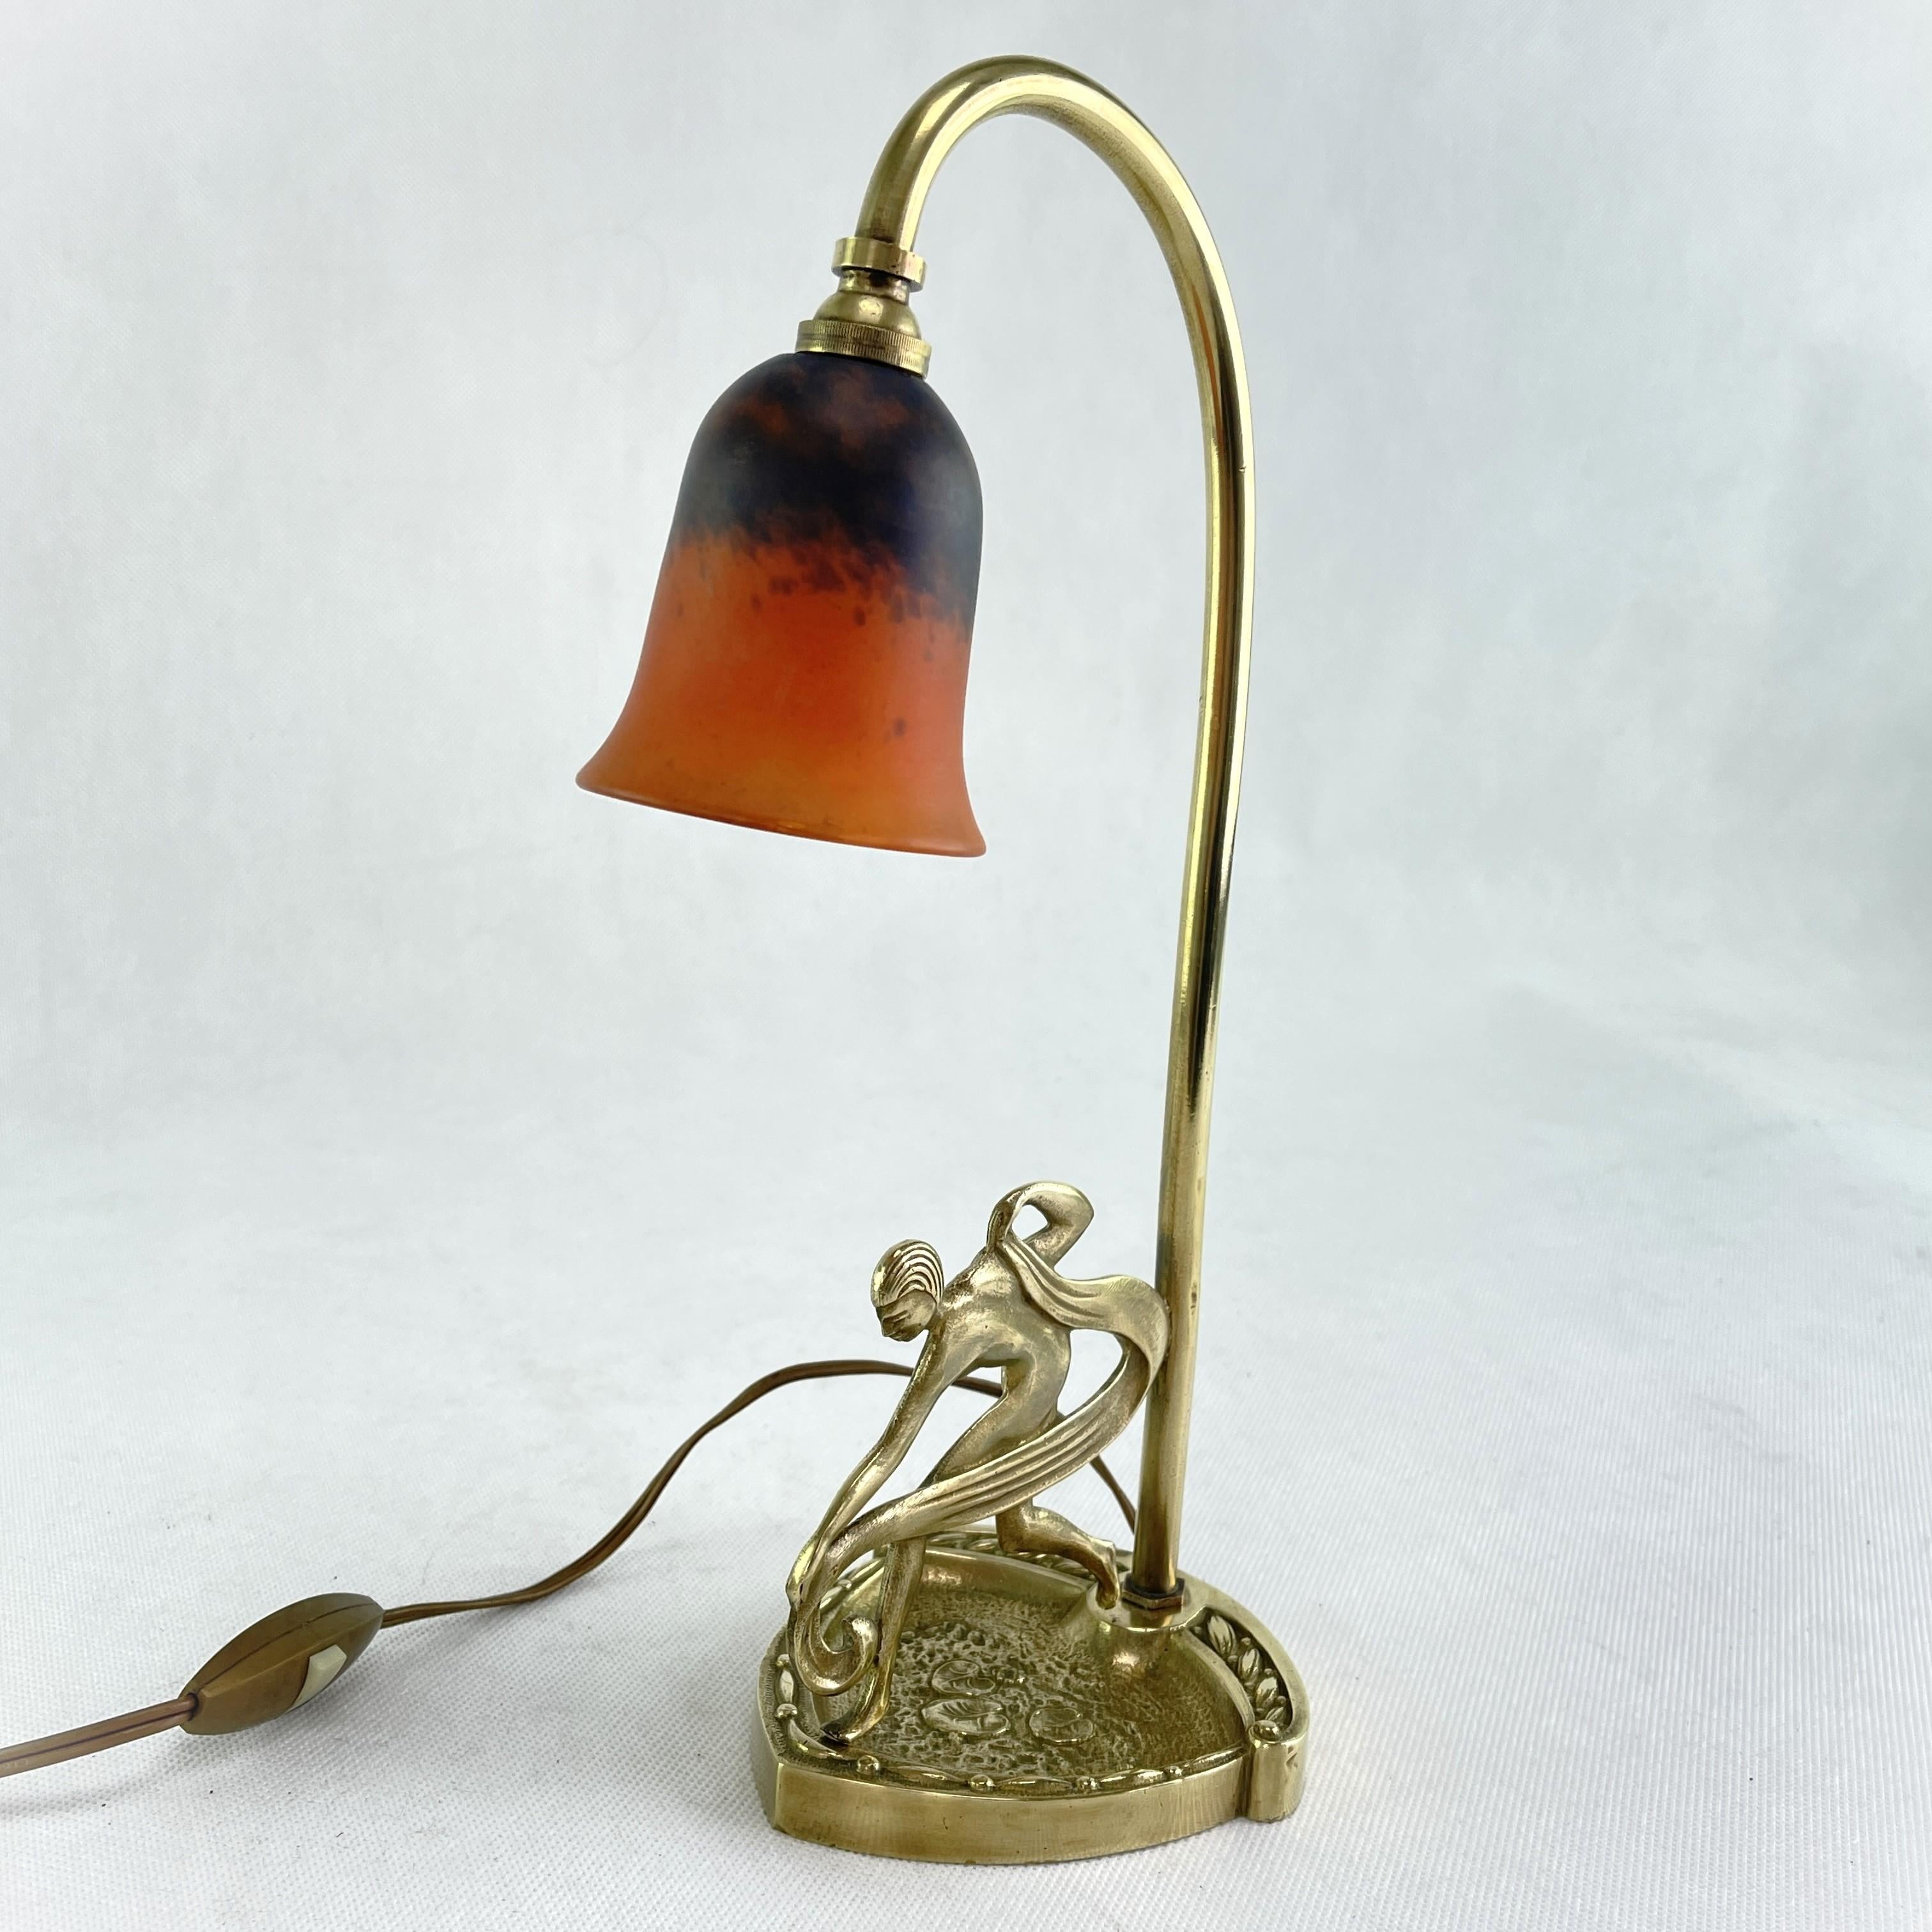 Art Deco Dancer Table Lamp by Schneider - 1930s

This original table lamp captivates with its simple and matter-of-fact Art Deco design. The lamp is signed 